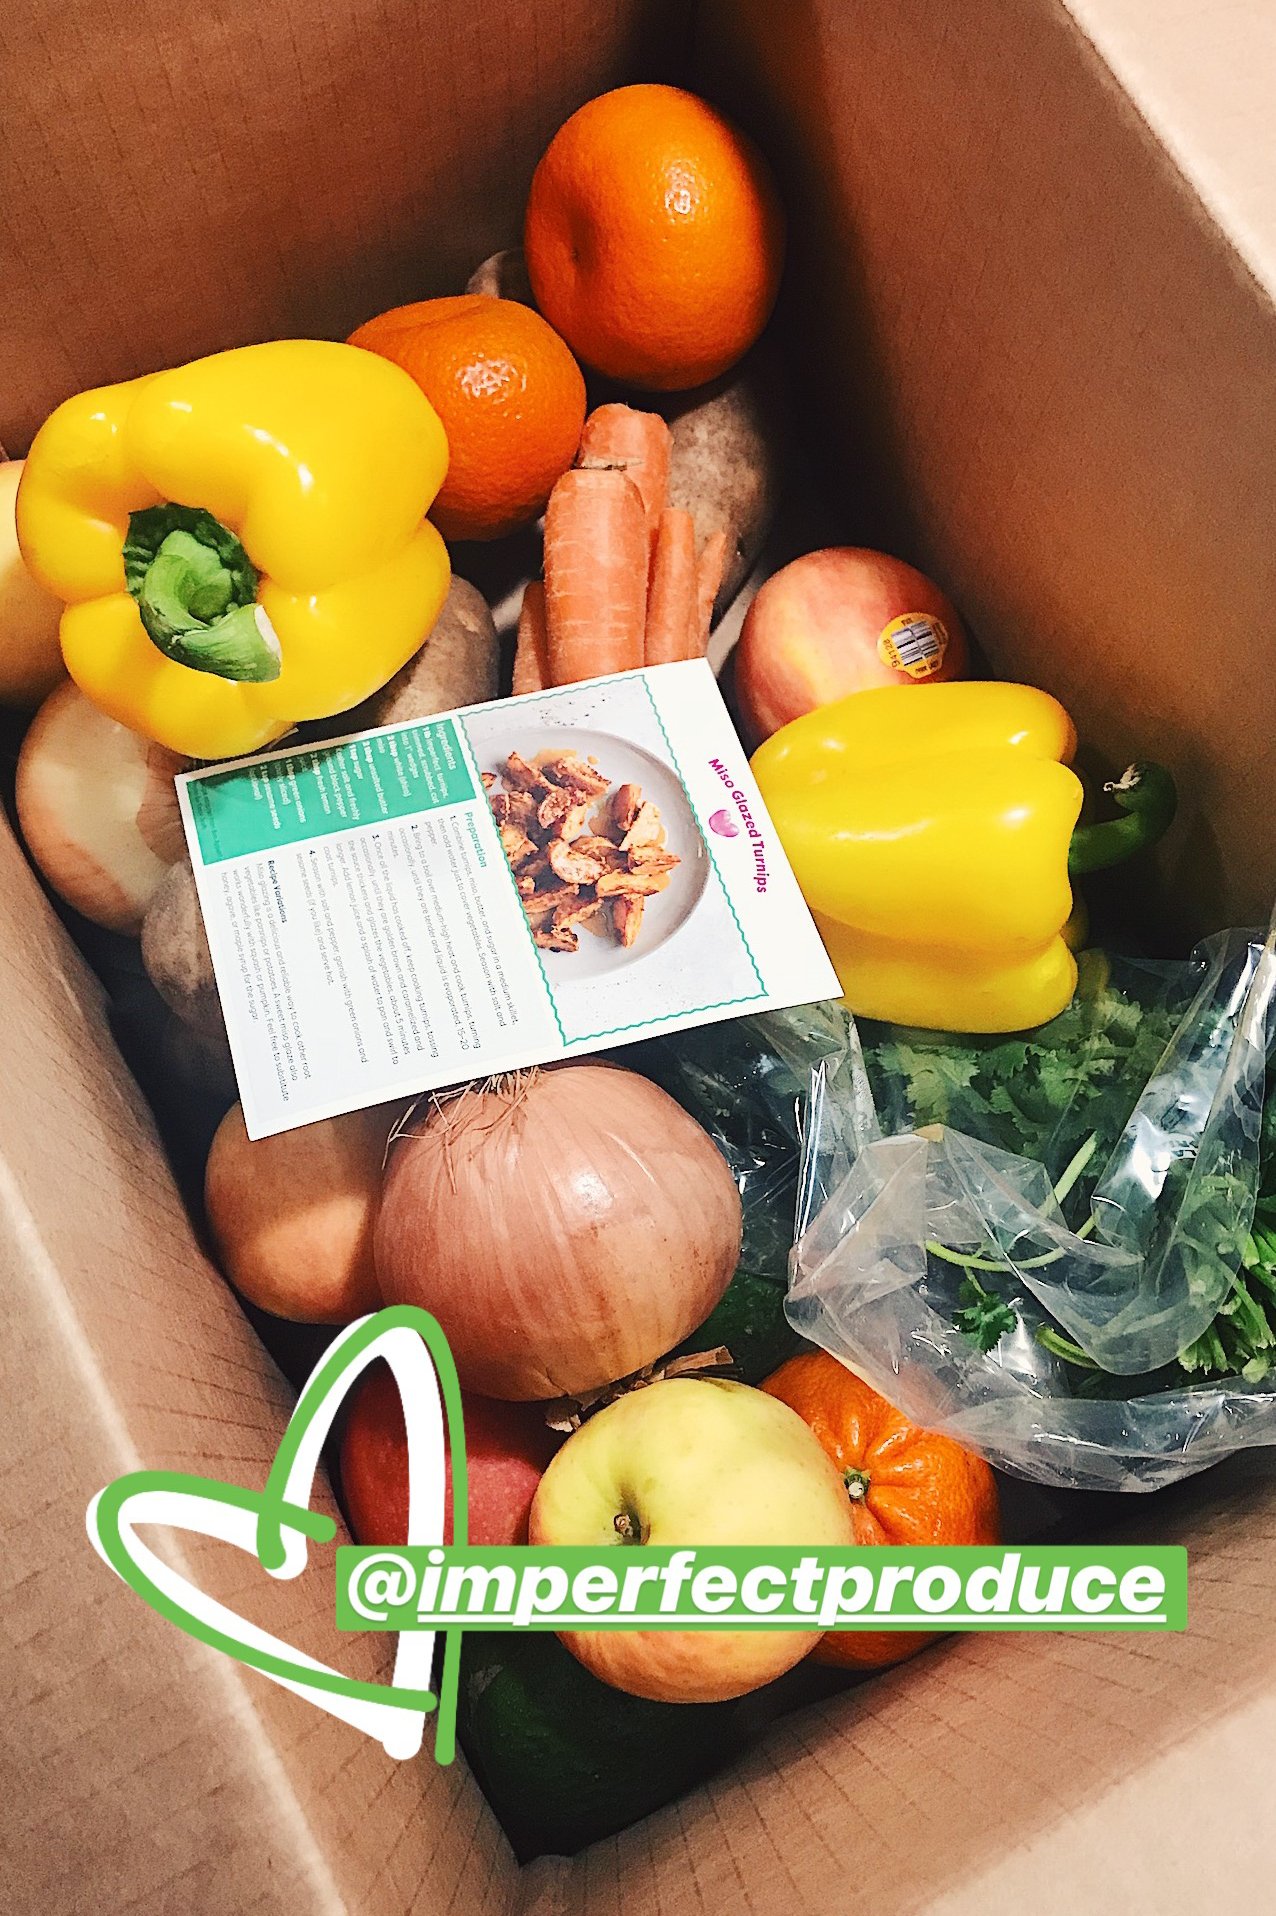 A box of produce from Imperfect Produce. It's important to plan around what food you already have before purchasing new.